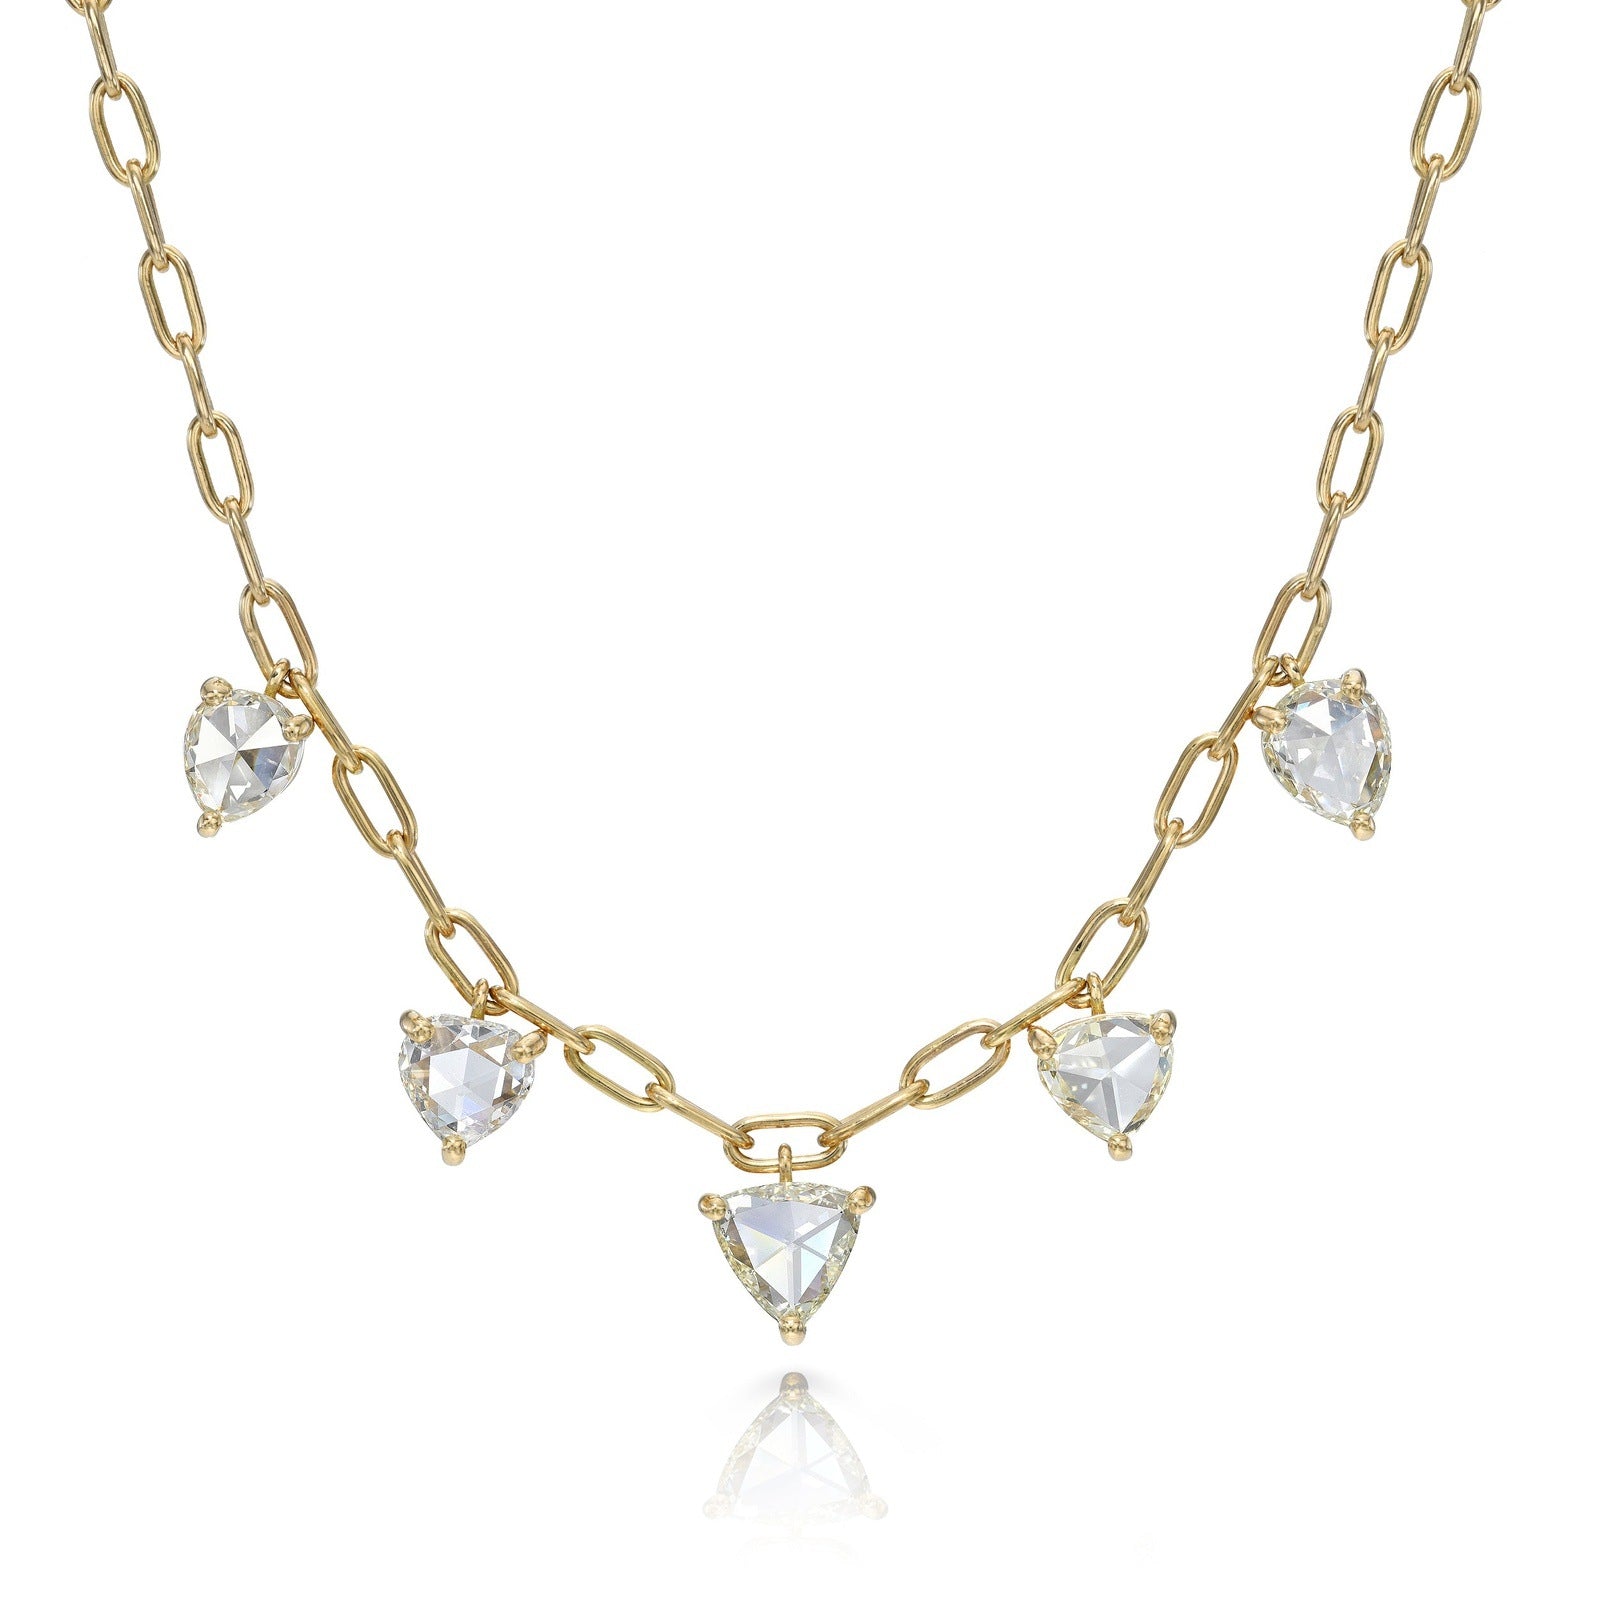 SINGLE STONE FIVE STONE CAILYN NECKLACE featuring 5.05ctw I-O-P/VS-SI pear shaped rose cut diamonds set on a handcrafted 18K yellow gold pendant necklace. Necklace measures 17".